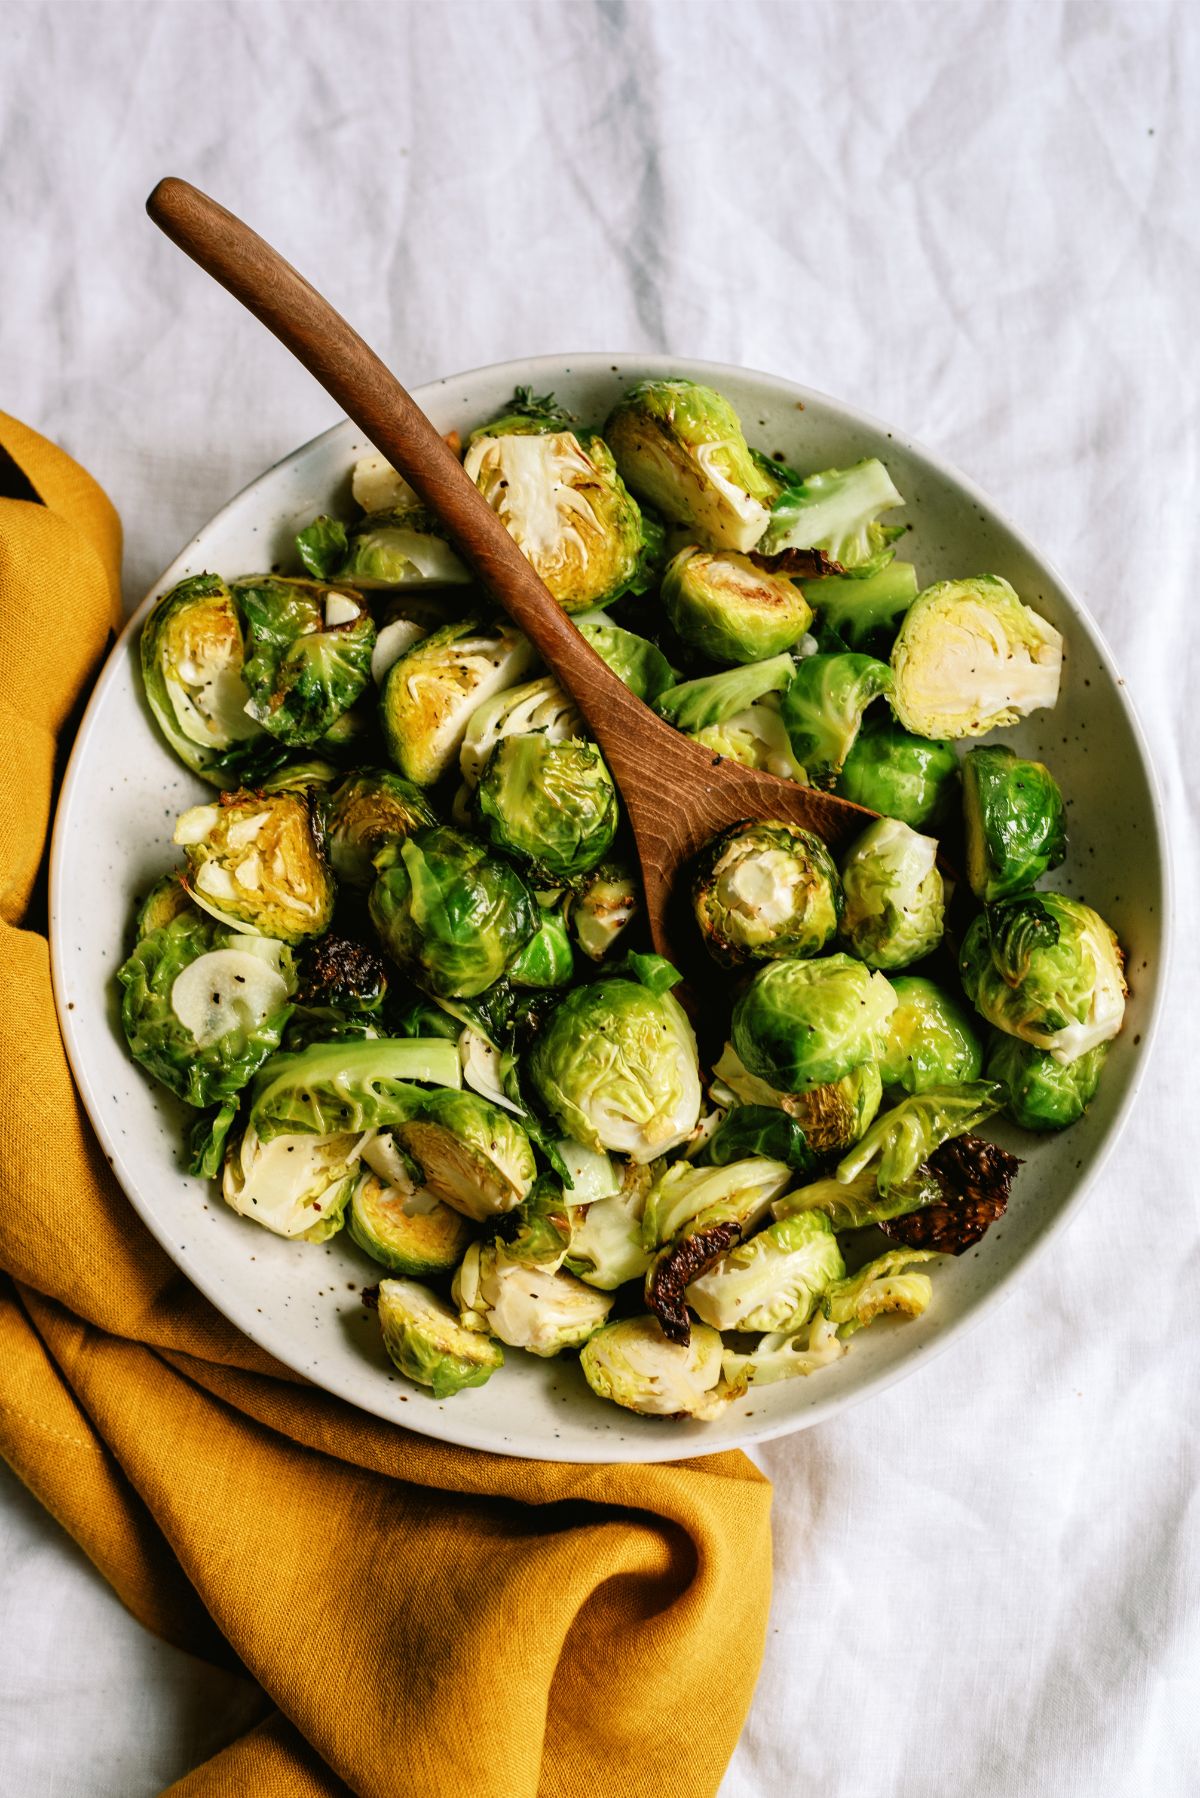 Garlic Roasted Brussels Sprouts Recipe